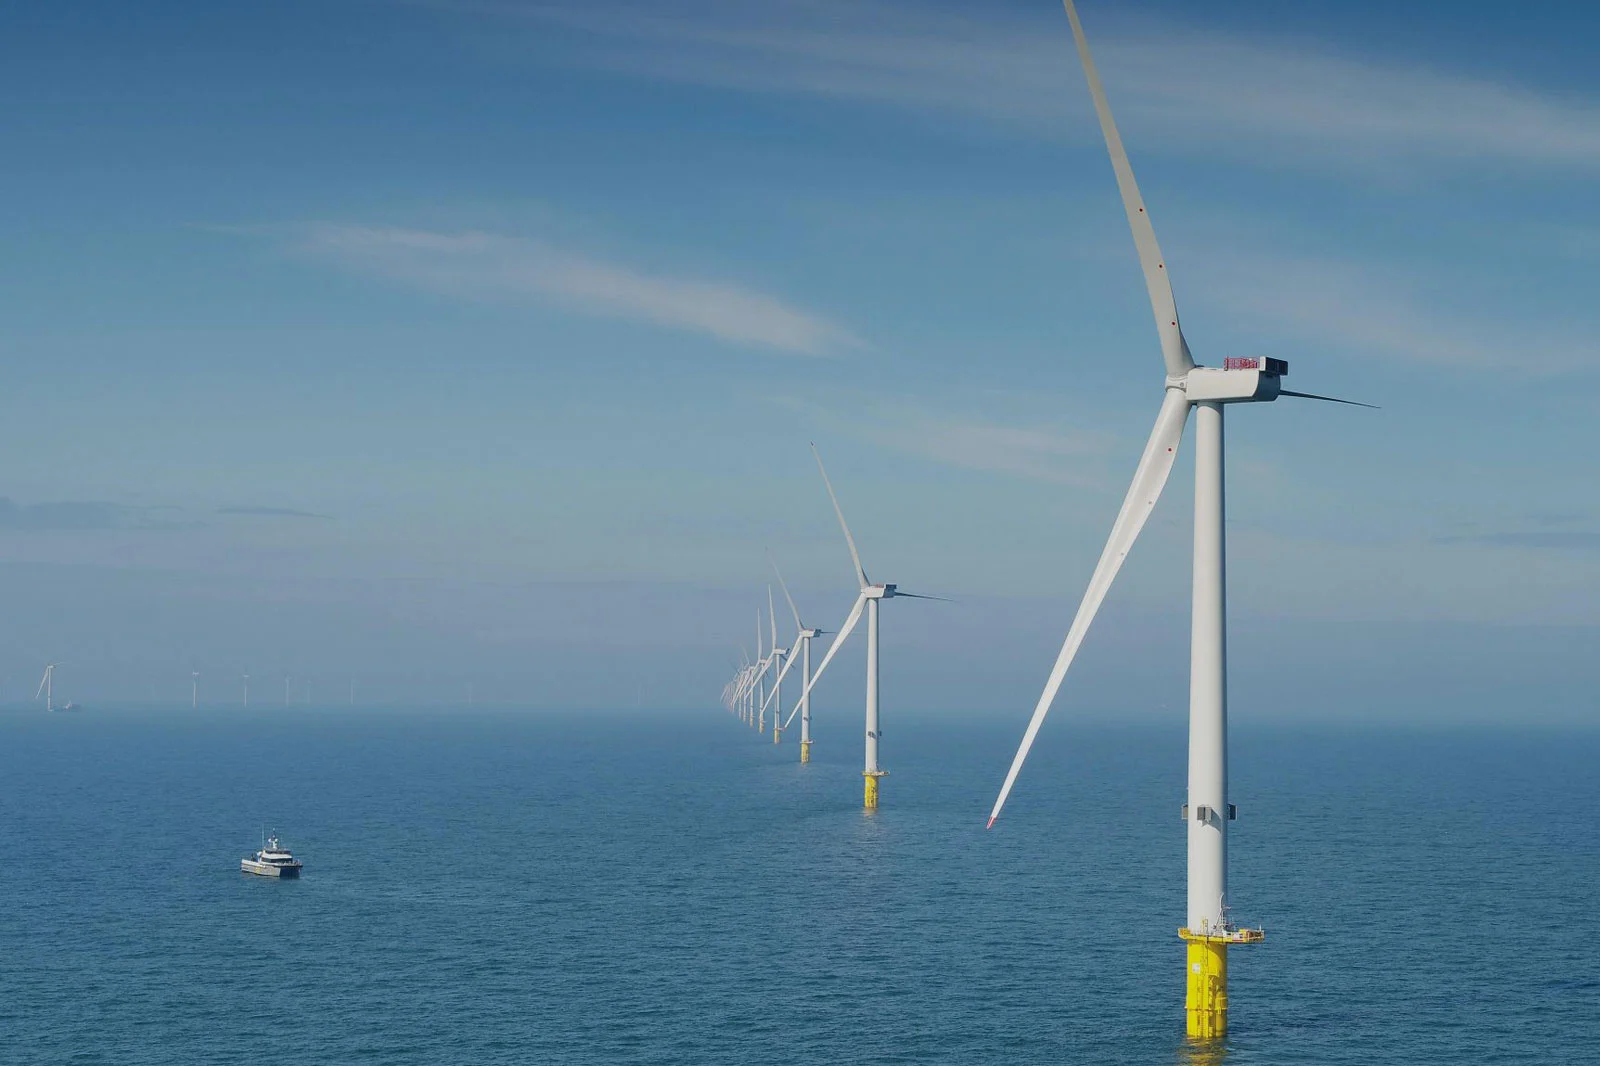 Coastal Virginia Offshore Wind: Construction Started